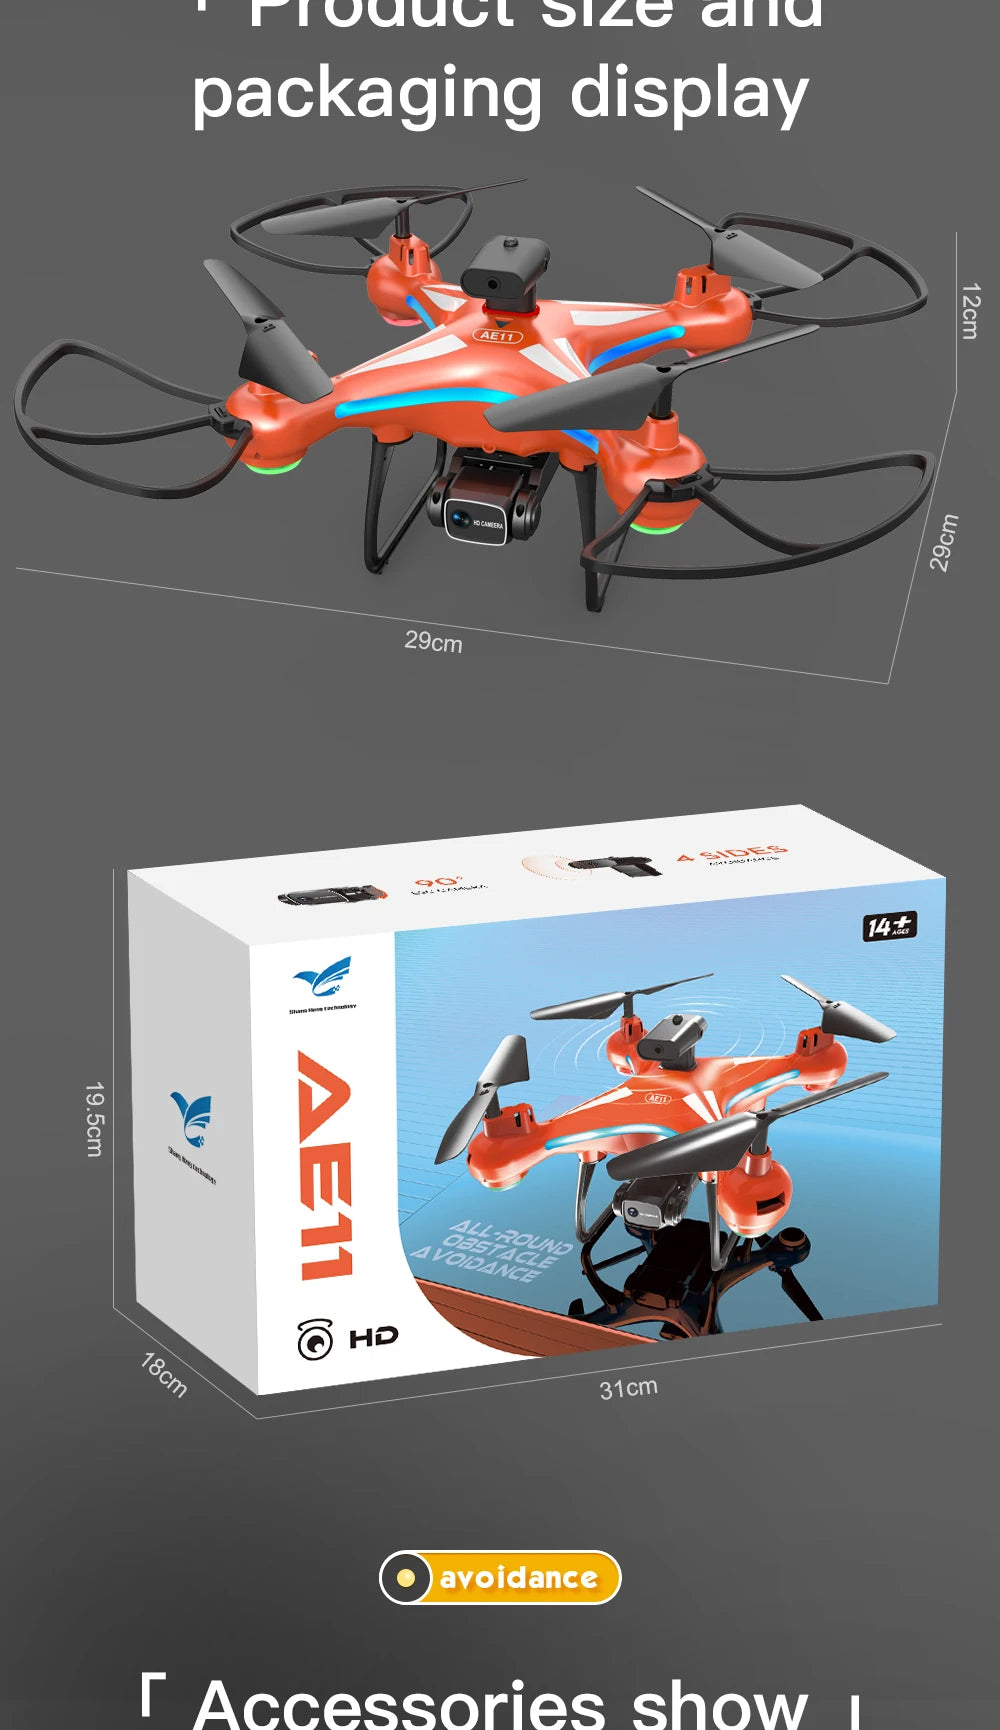 AE11 Drone, do not put it in high temperature conditions